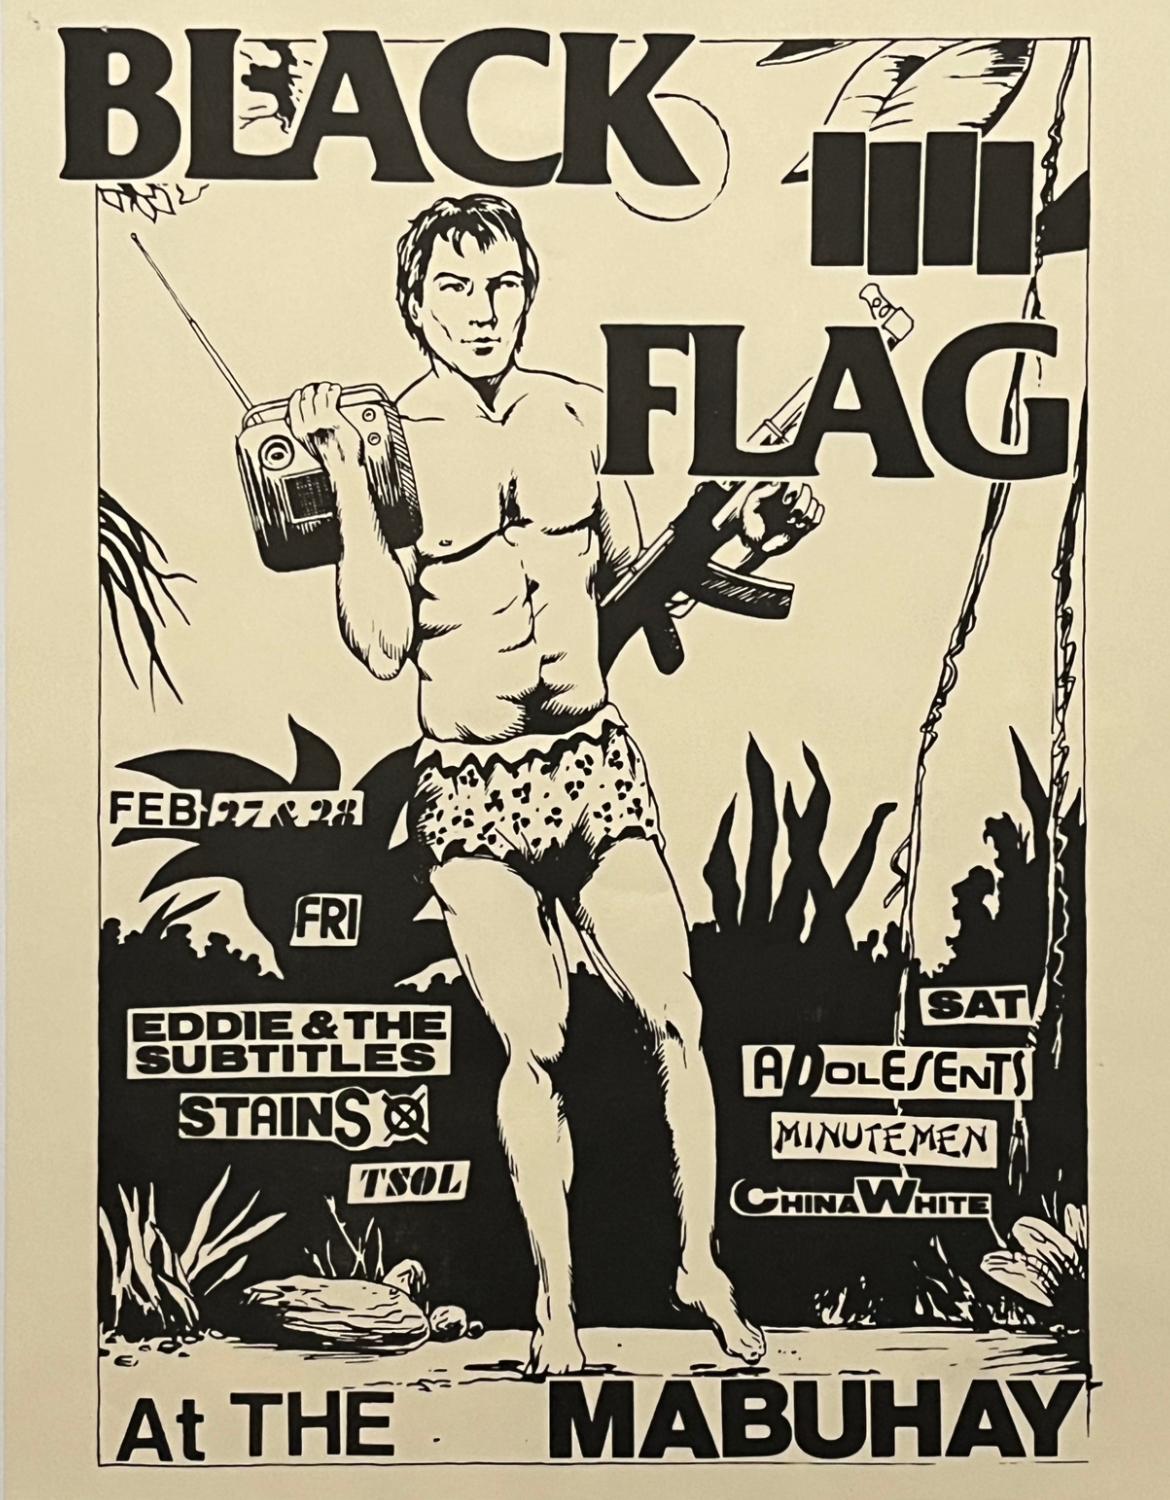 Raymond Pettibon Black Flag 1981:
A rare early Pettibon illustrated punk flyer published on the occasion of: Black Flag at the Mabuhay: Feb 27- Feb 28, 1981. A gig by Black Flag, Eddie and the Subtitles, Stains, TSOL, Adolescents, Minutemen, China